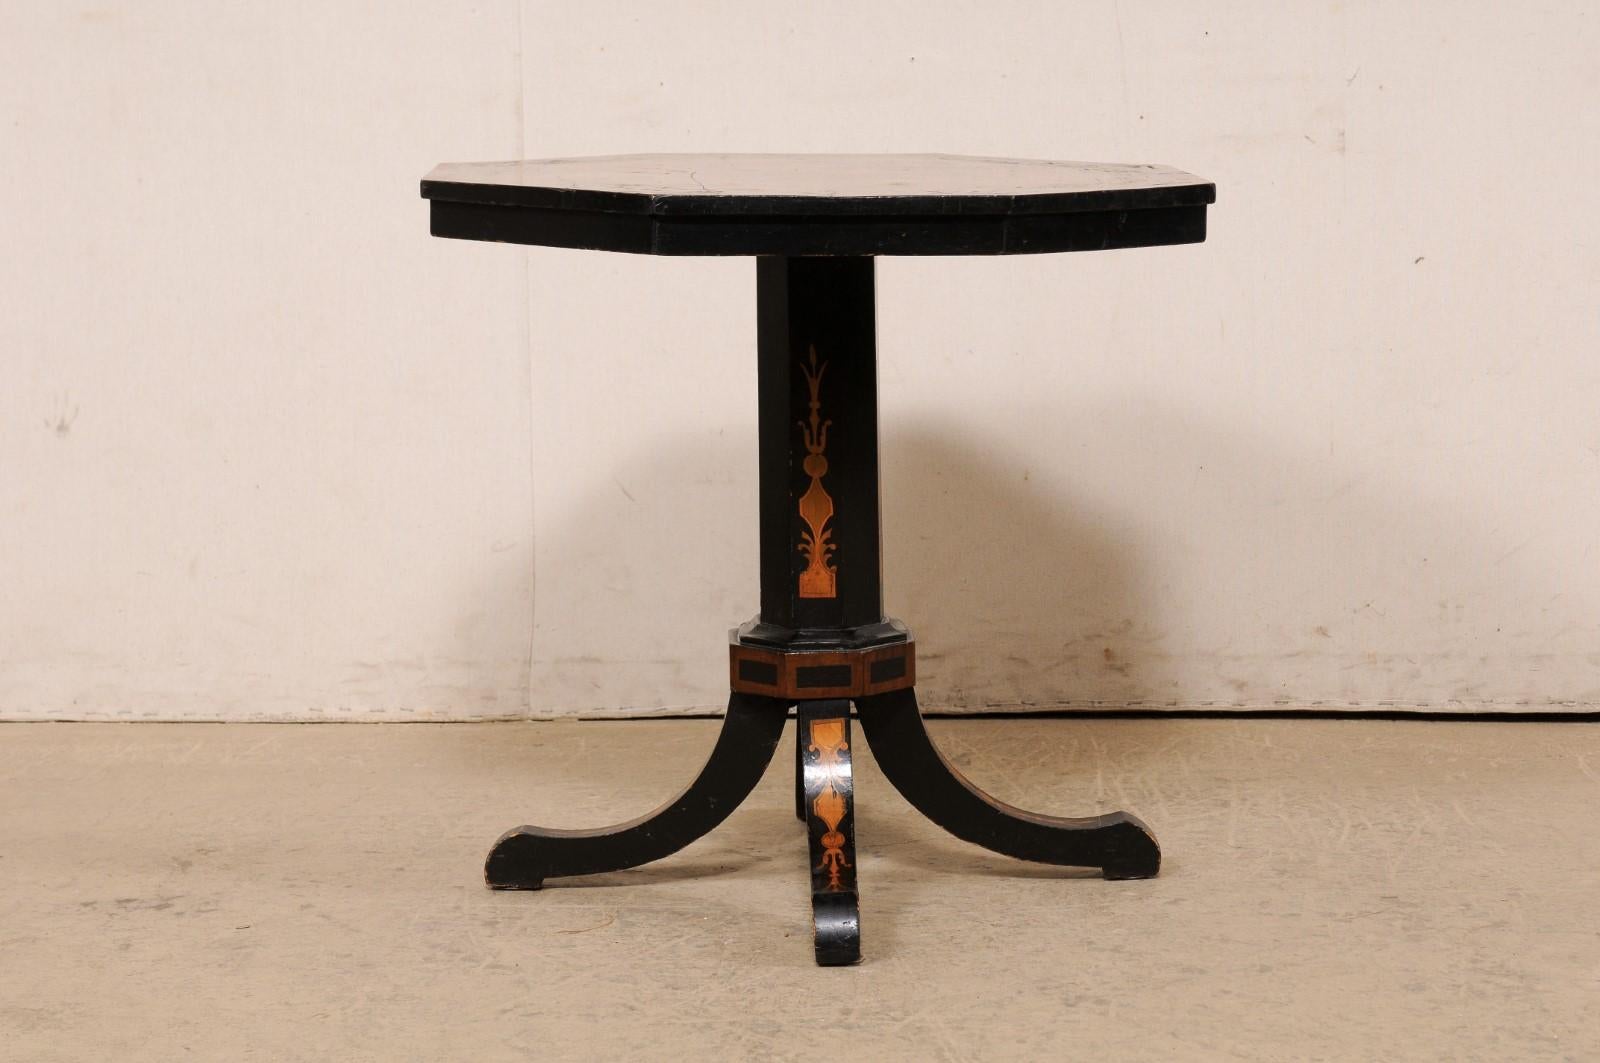 19th Century Octagonal Pedestal Table with Wonderful Inlay Embellishments 4